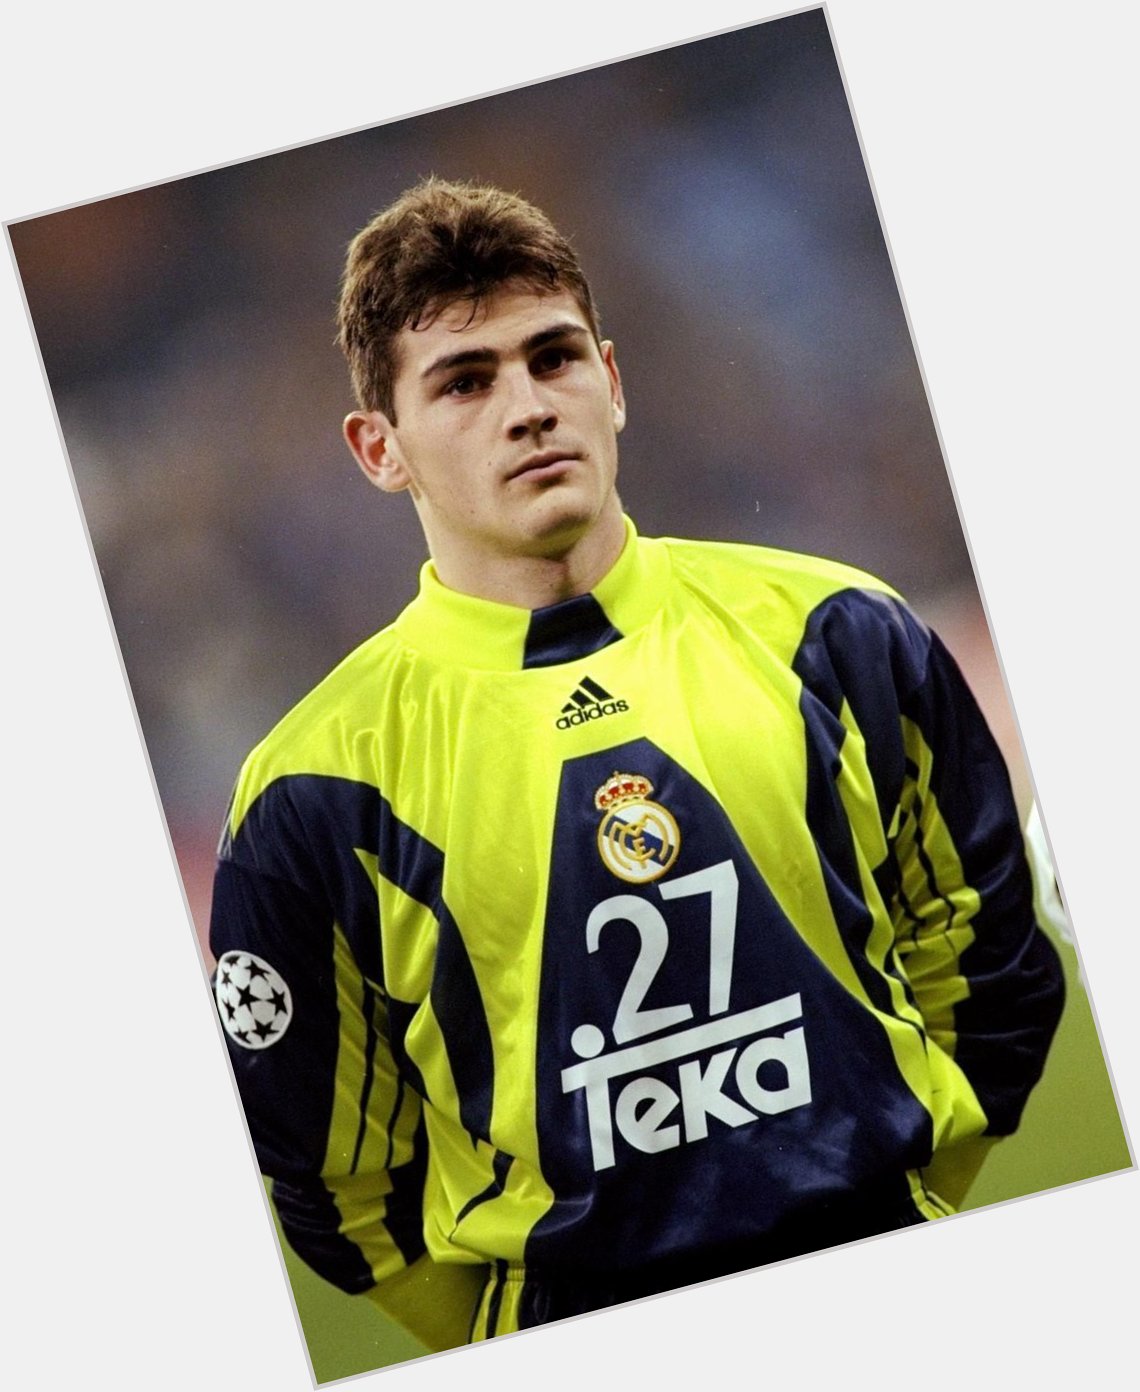 Happy Birthday Iker Casillas He won his first Champions League only four days after his 19th birthday 